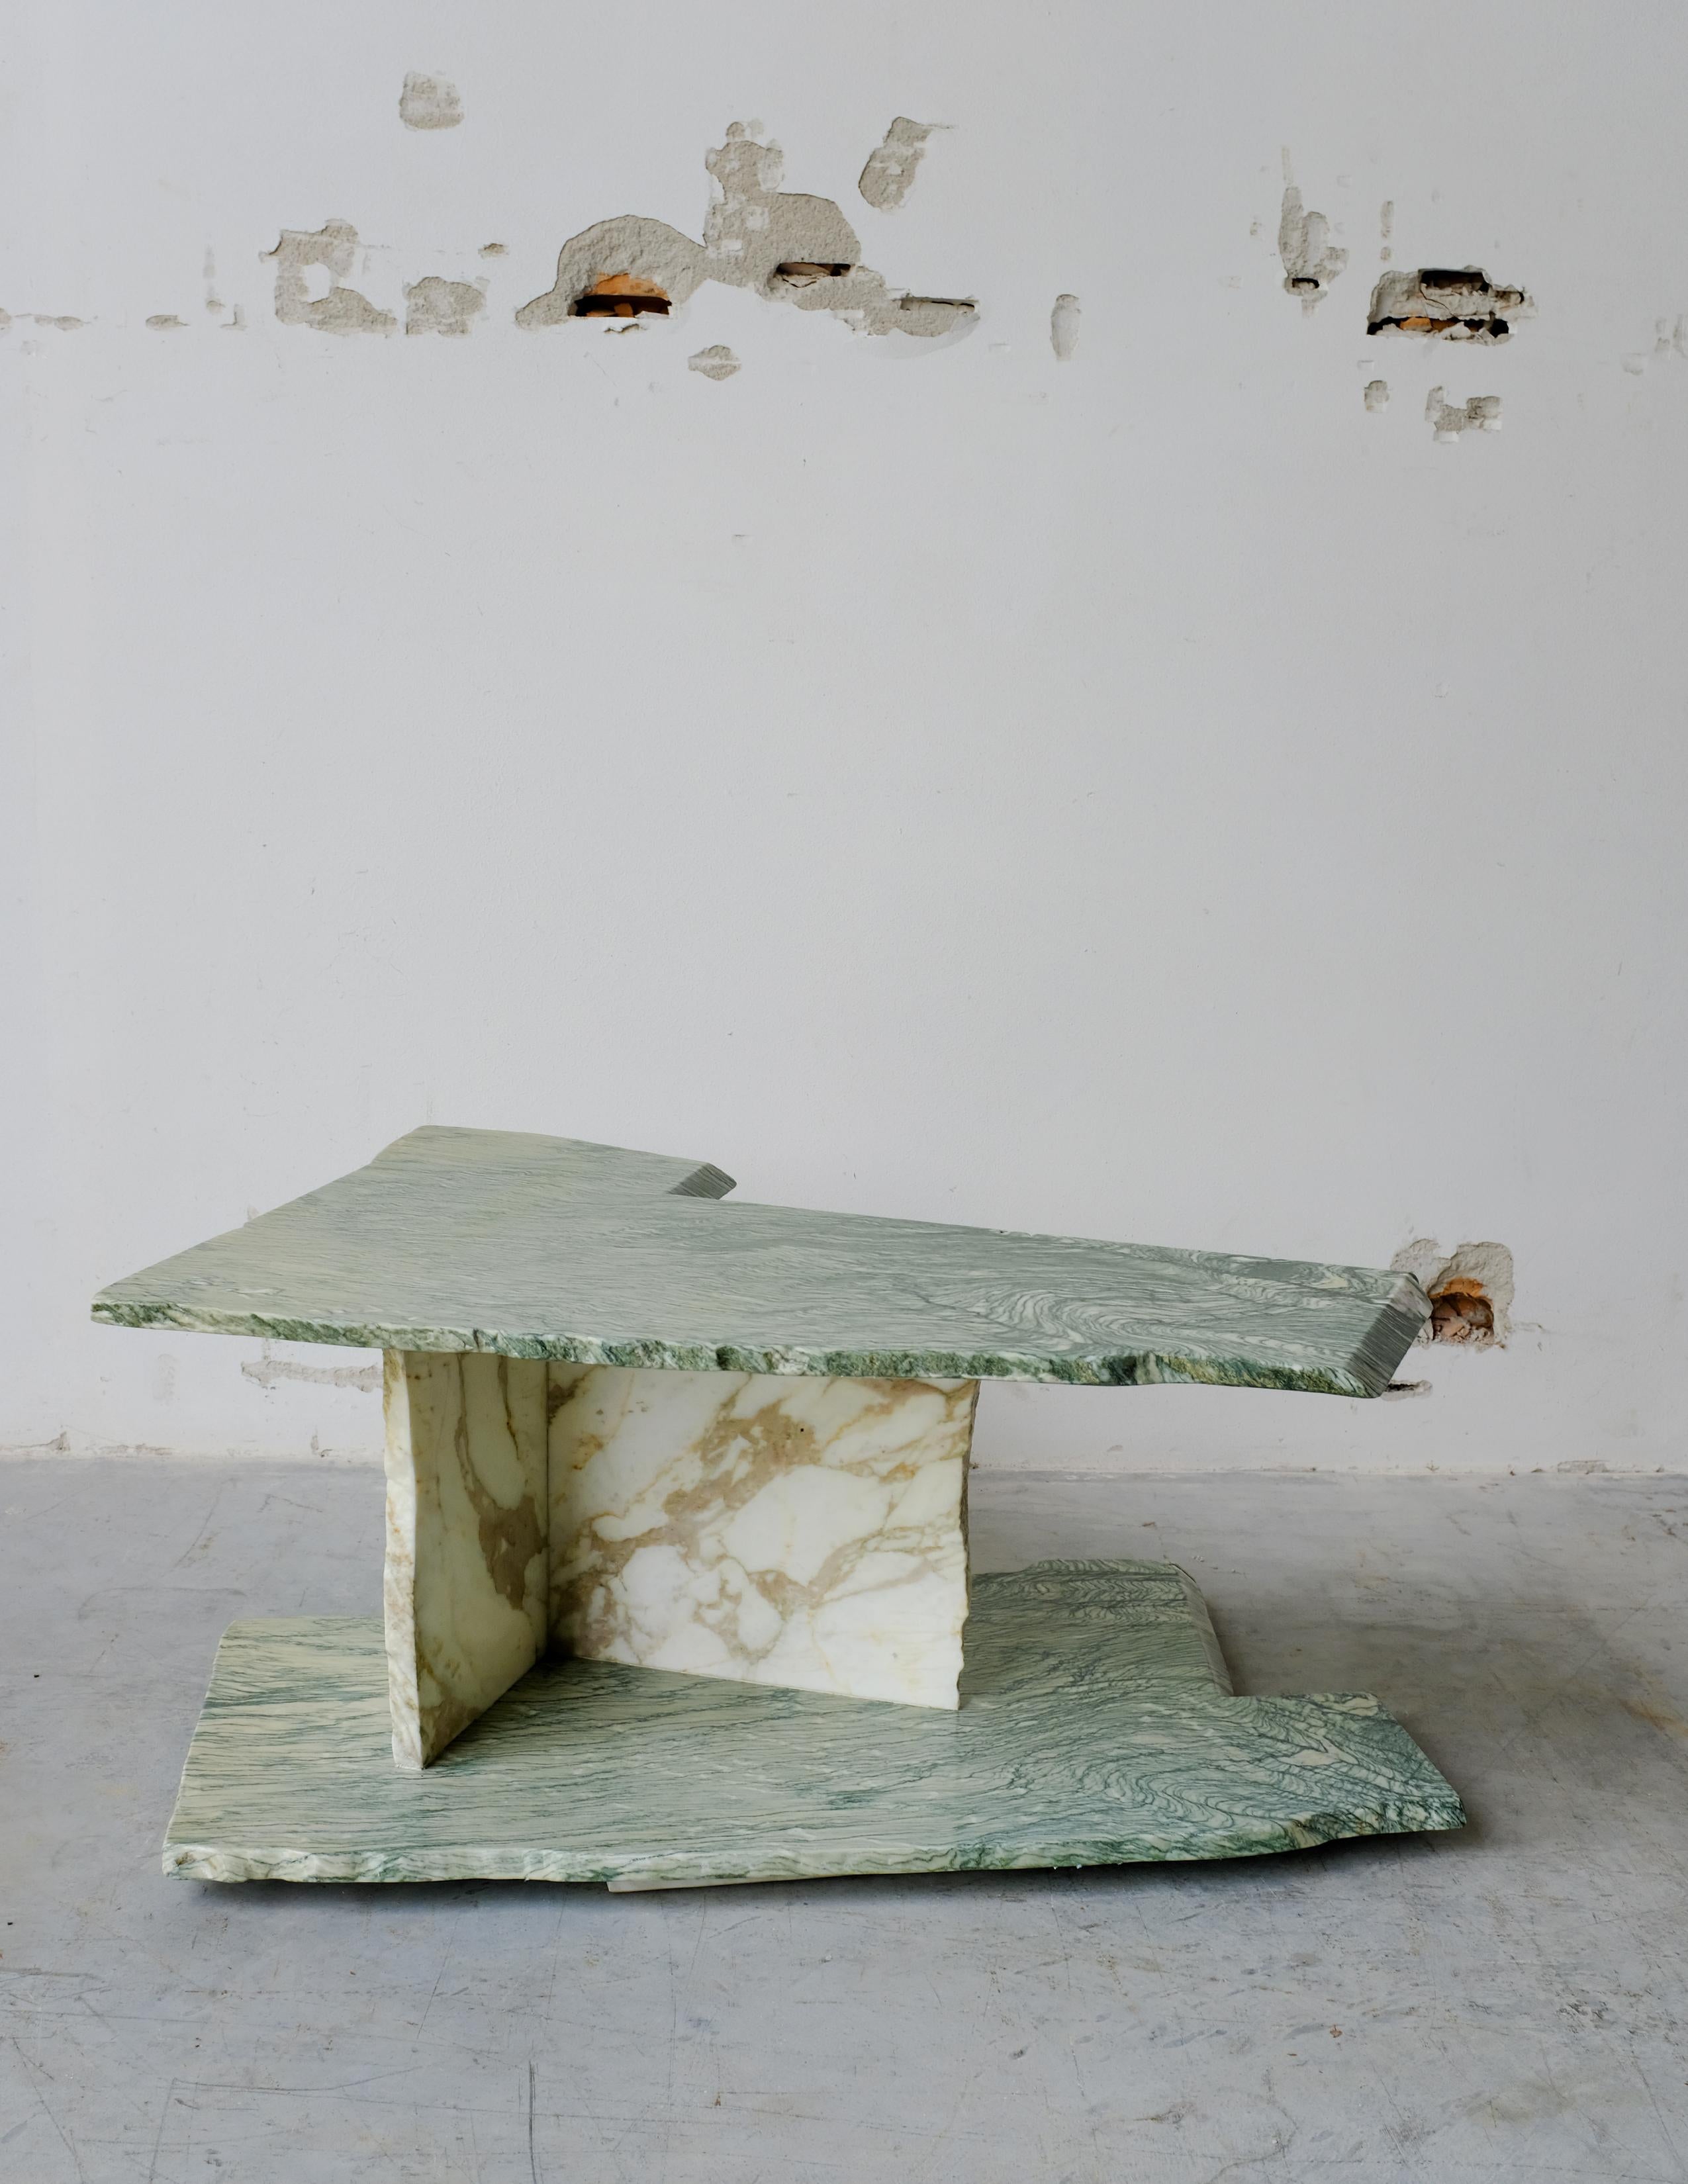 SST004 coffee table by Stone Stackers
One of a Kind
Dimensions: D 60 x W 83.5 x H 34.5 cm
Materials: Calacatta Oro marble, Cipollino Verde marble.
Marble Top & Bottom: Cipollino Verde
Marble Structure: Calacatta Oro
Weight: 37 kg

This coffee table